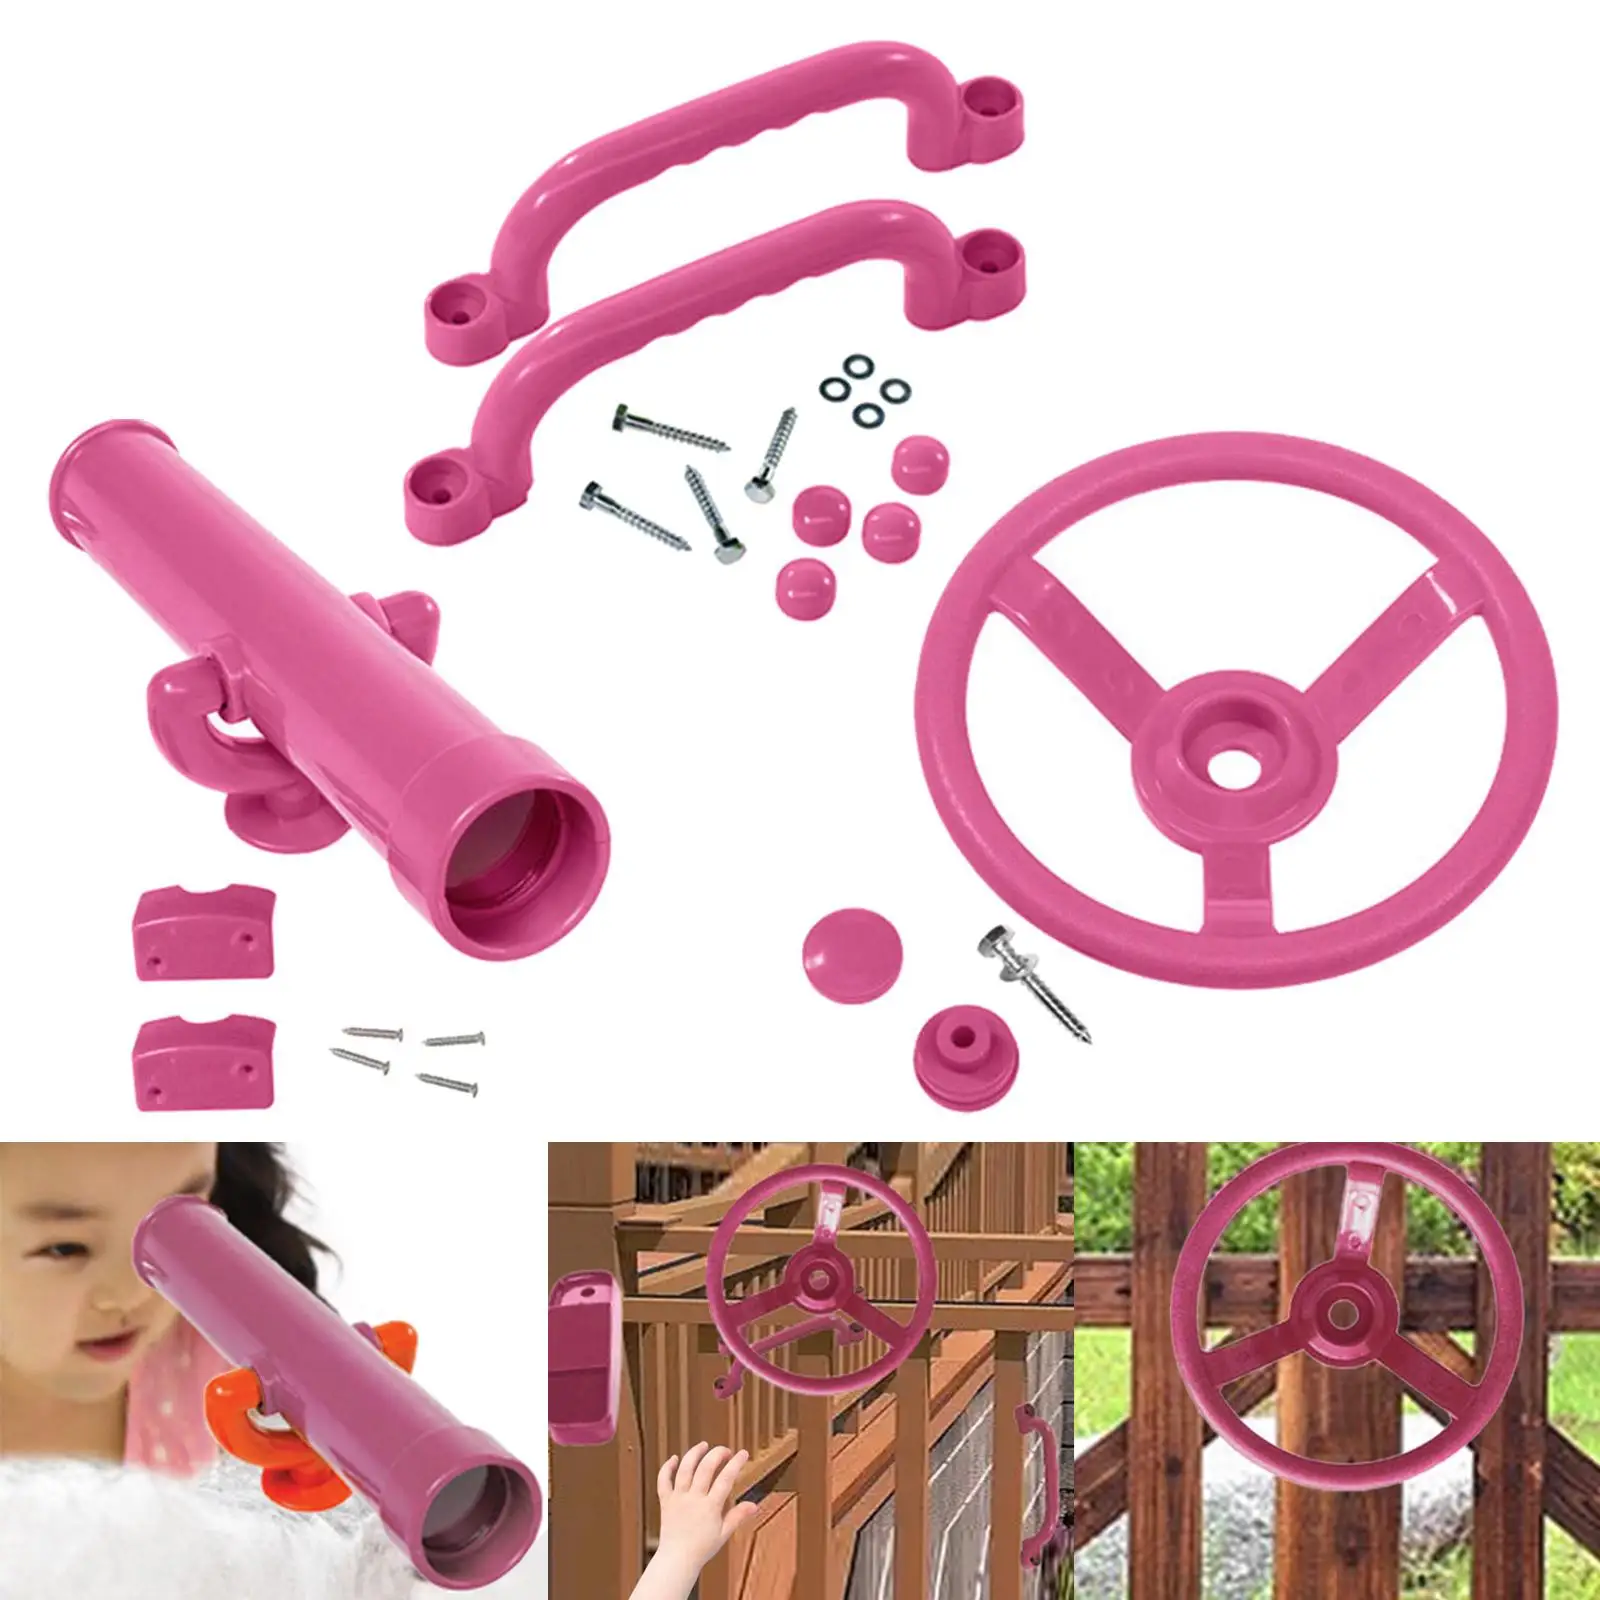 Playground Equipment Pirate Telescope Steering Wheel Handle Bars for Jungle Gym Tree House Climbing Frame Swingset Parts